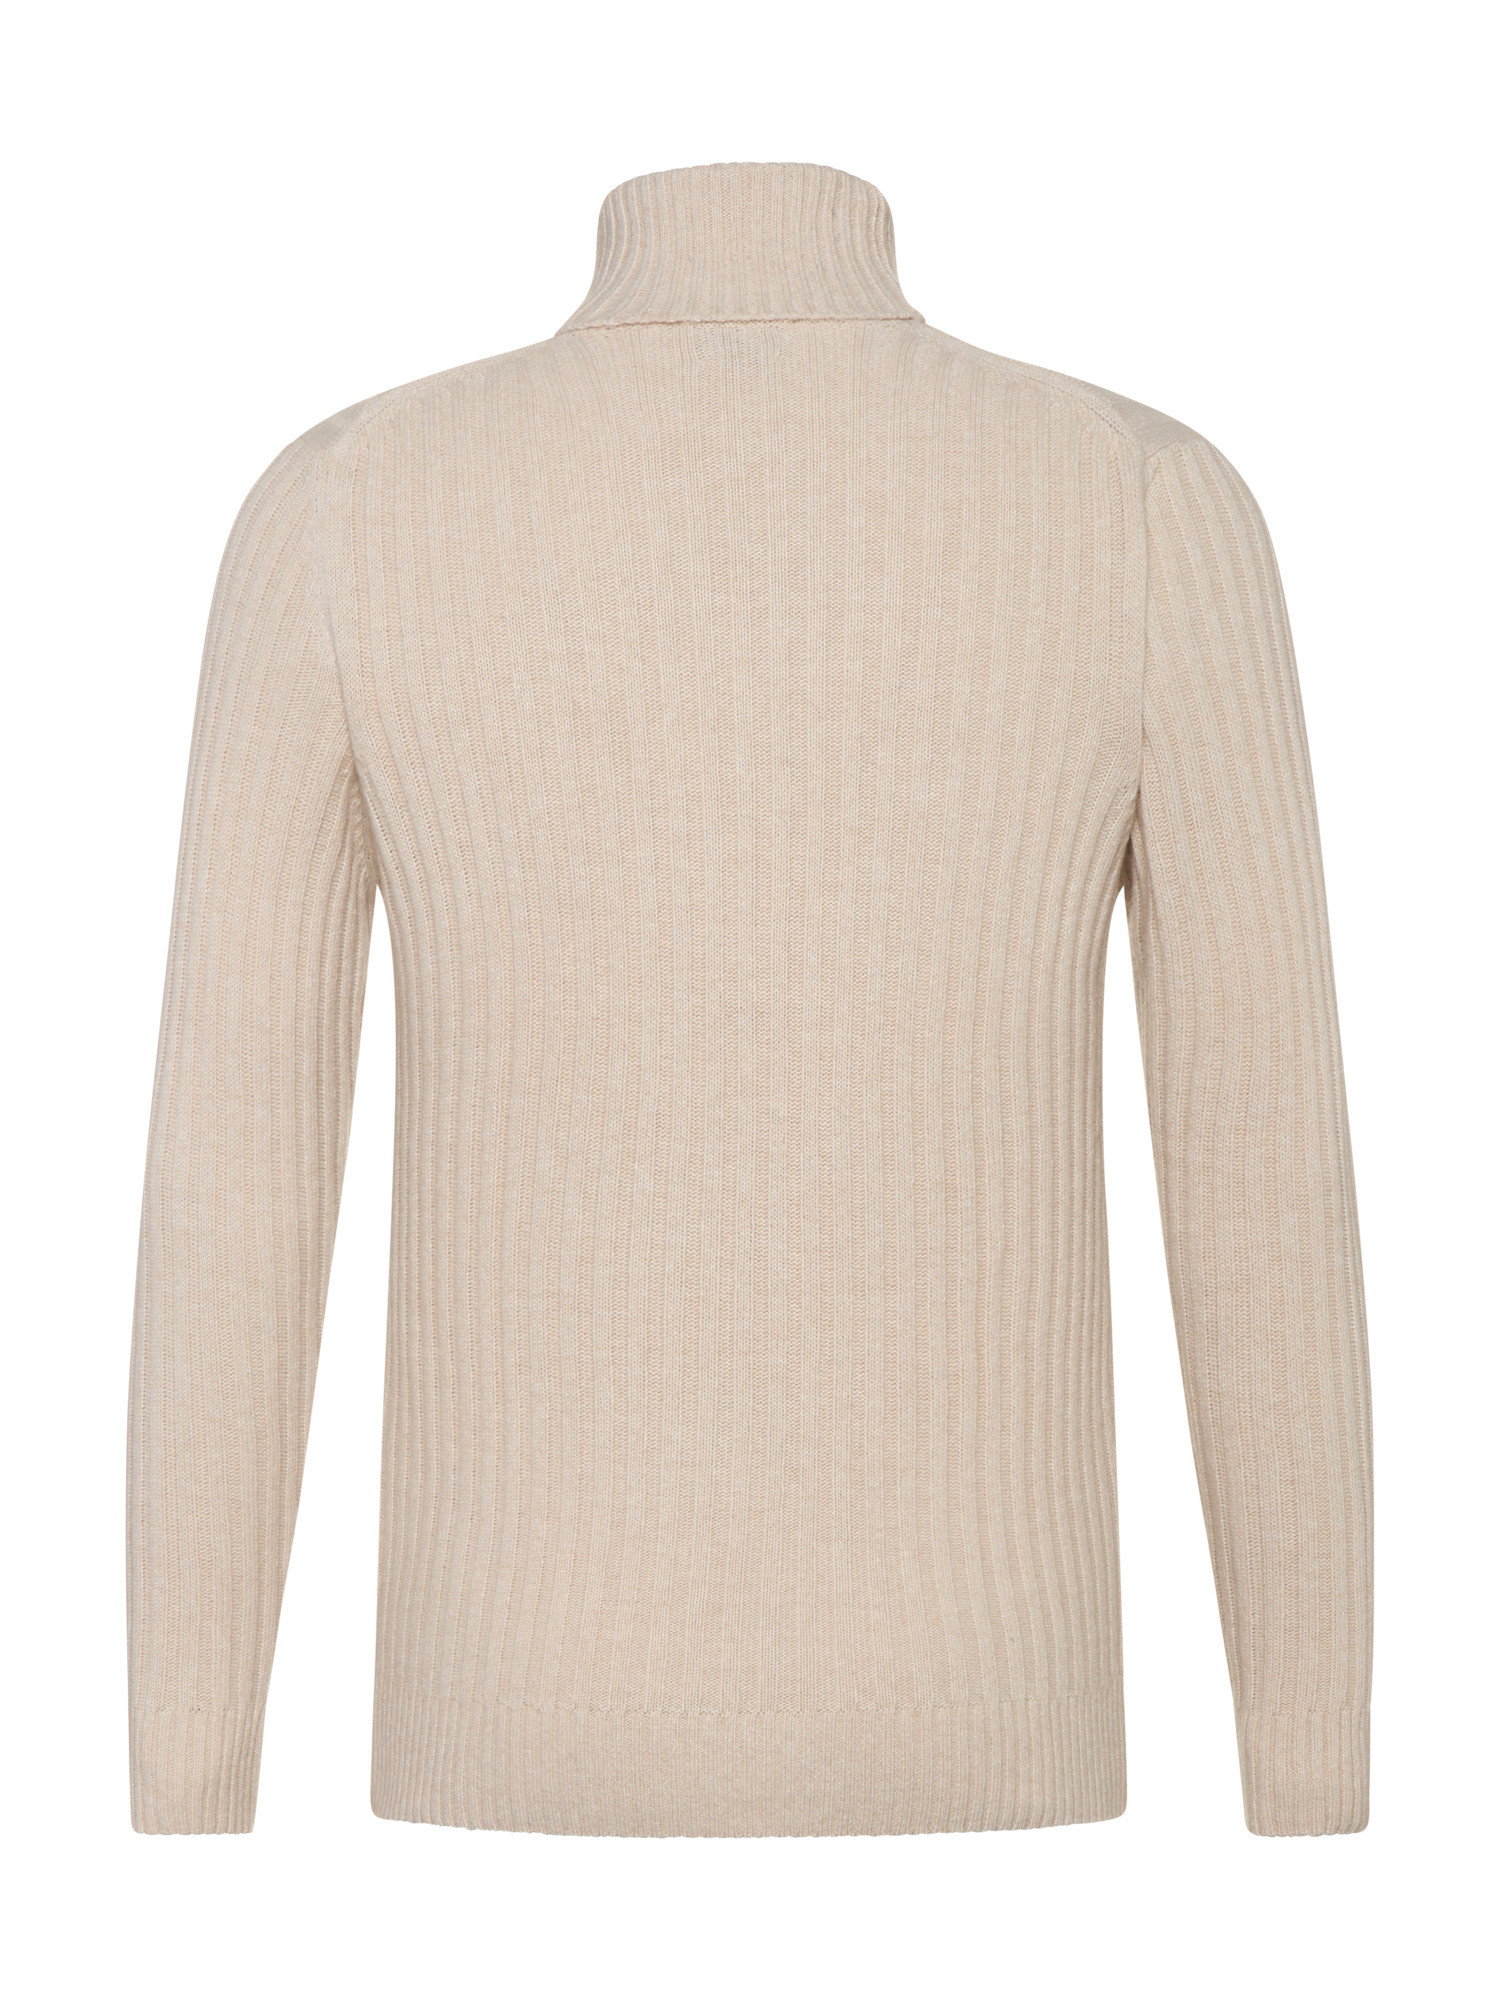 Luca D'Altieri - Cashmere blend and wool turtleneck, White Cream, large image number 1